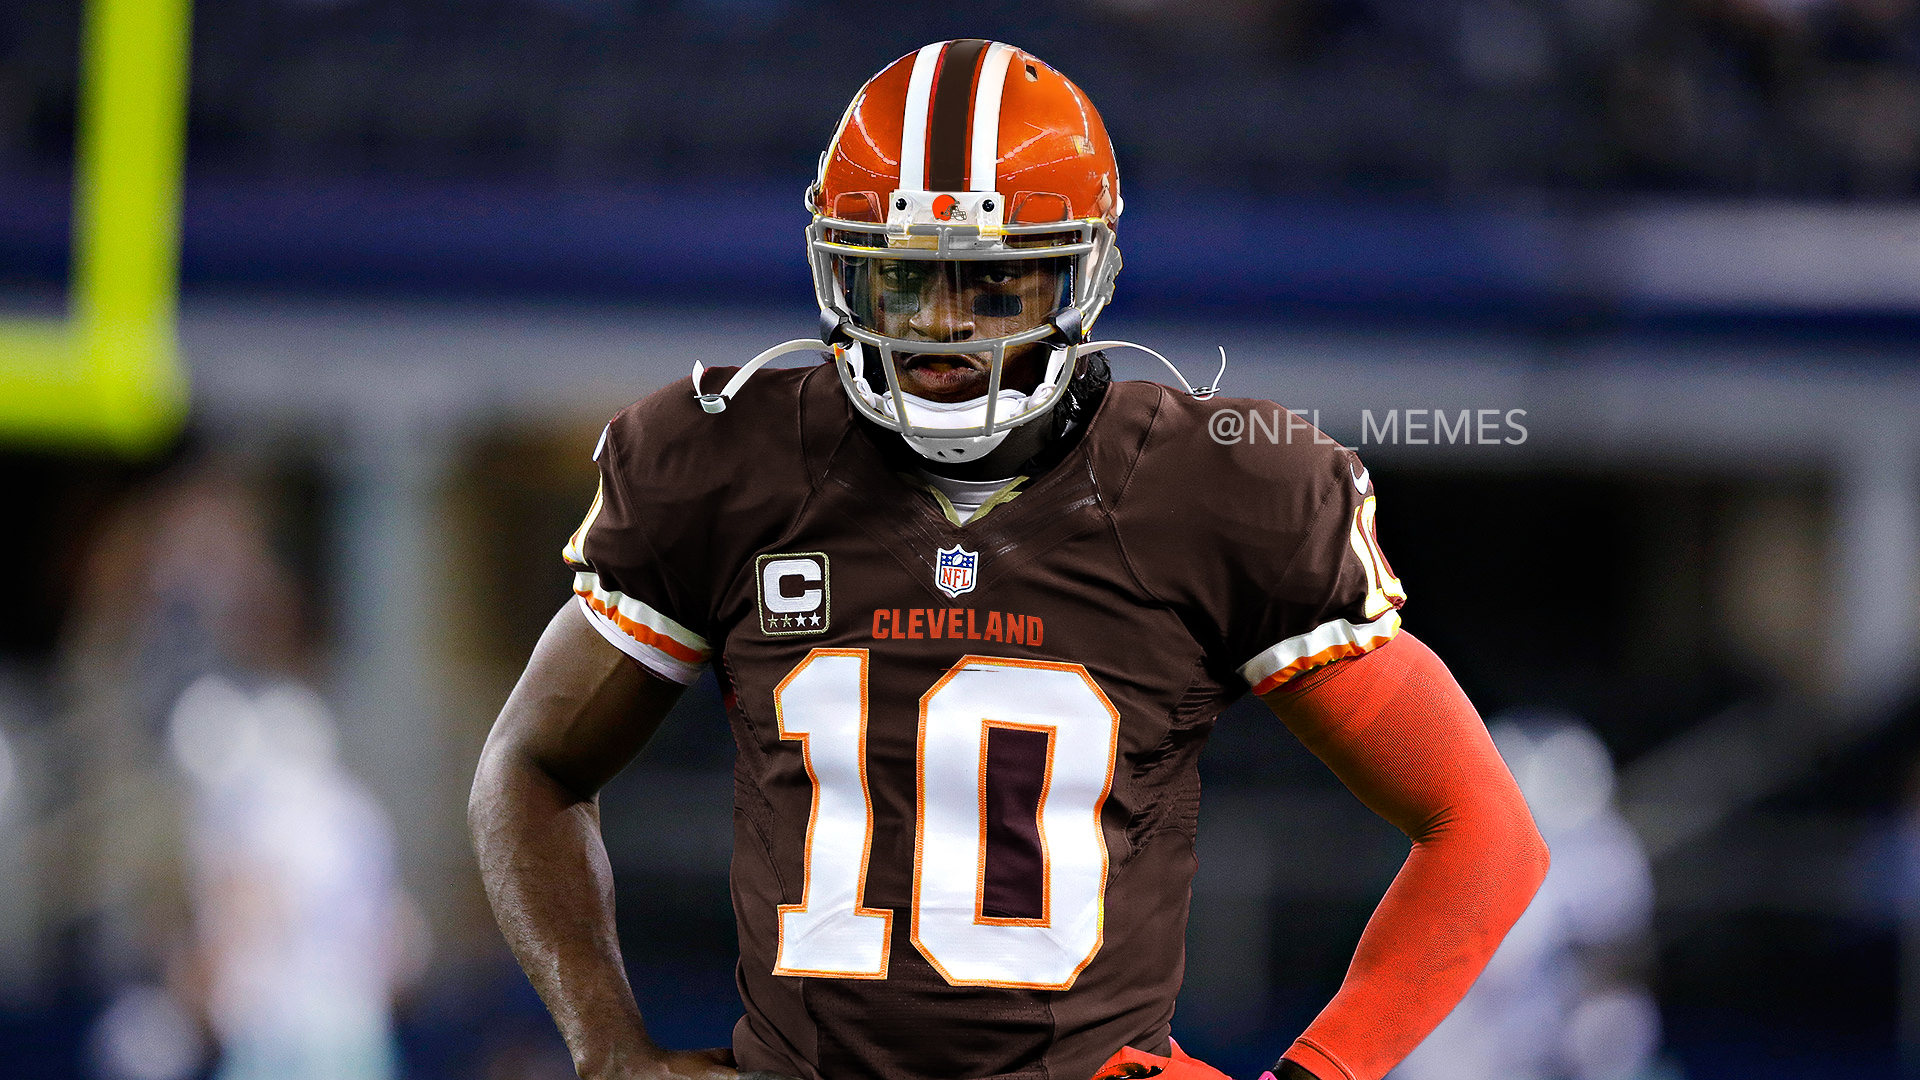 rg3 browns jersey, OFF 79%,Cheap price!